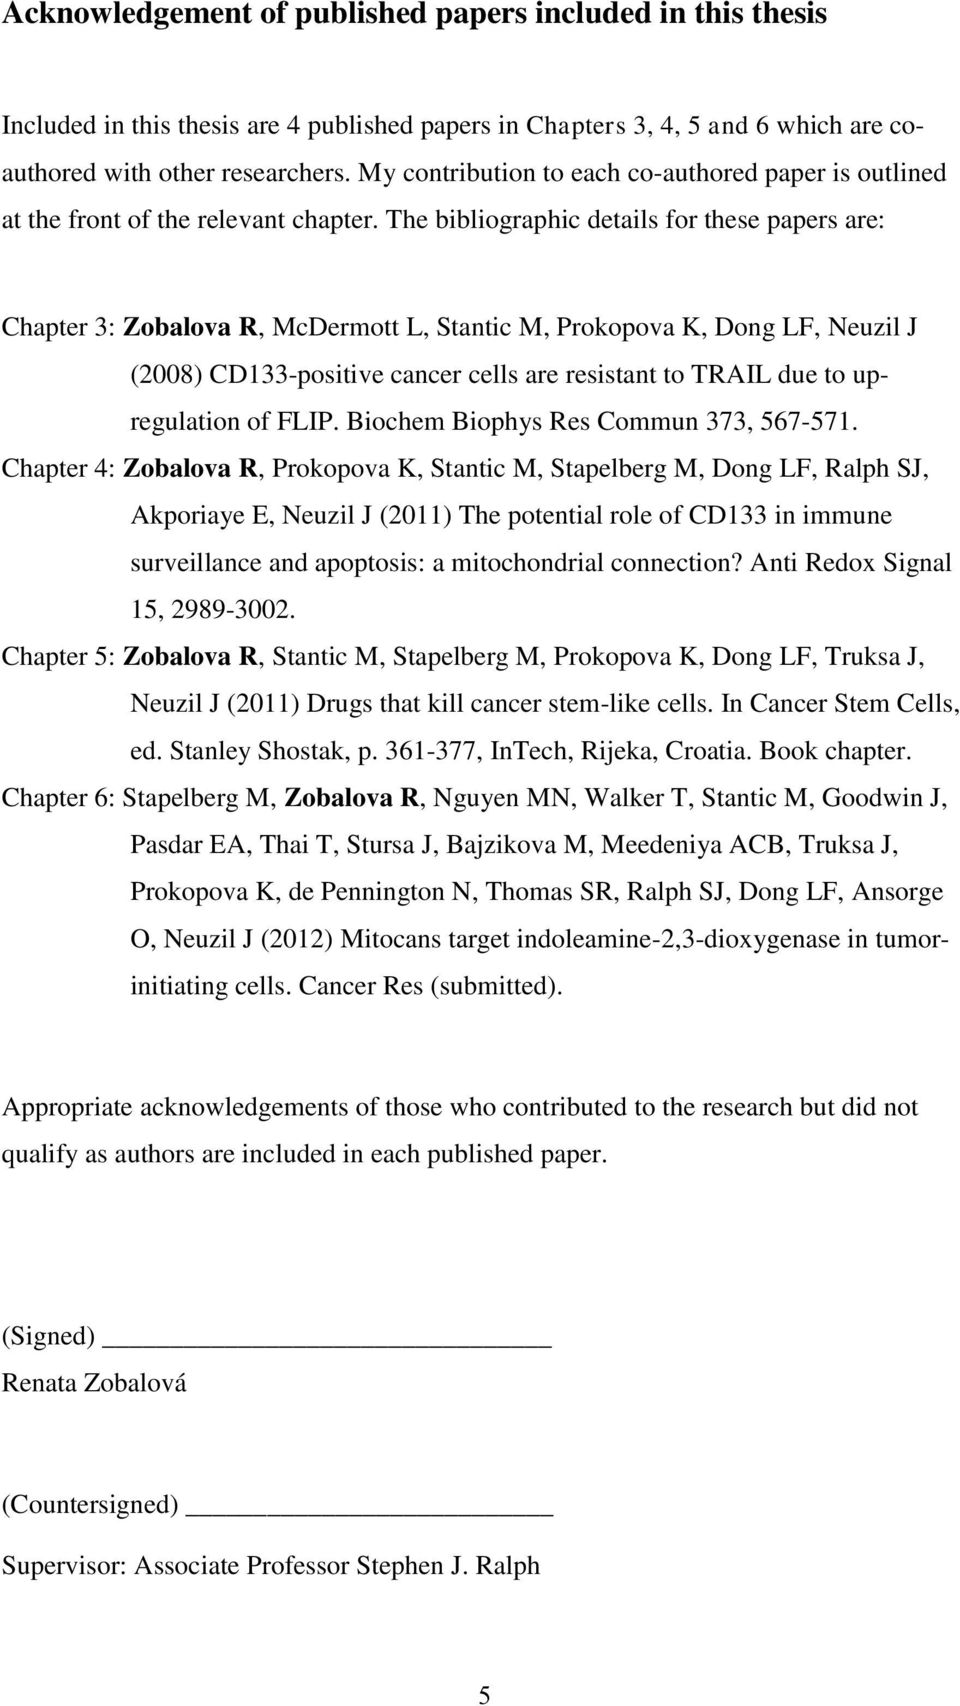 The bibliographic details for these papers are: Chapter 3: Zobalova R, McDermott L, Stantic M, Prokopova K, Dong LF, Neuzil J (2008) CD133-positive cancer cells are resistant to TRAIL due to